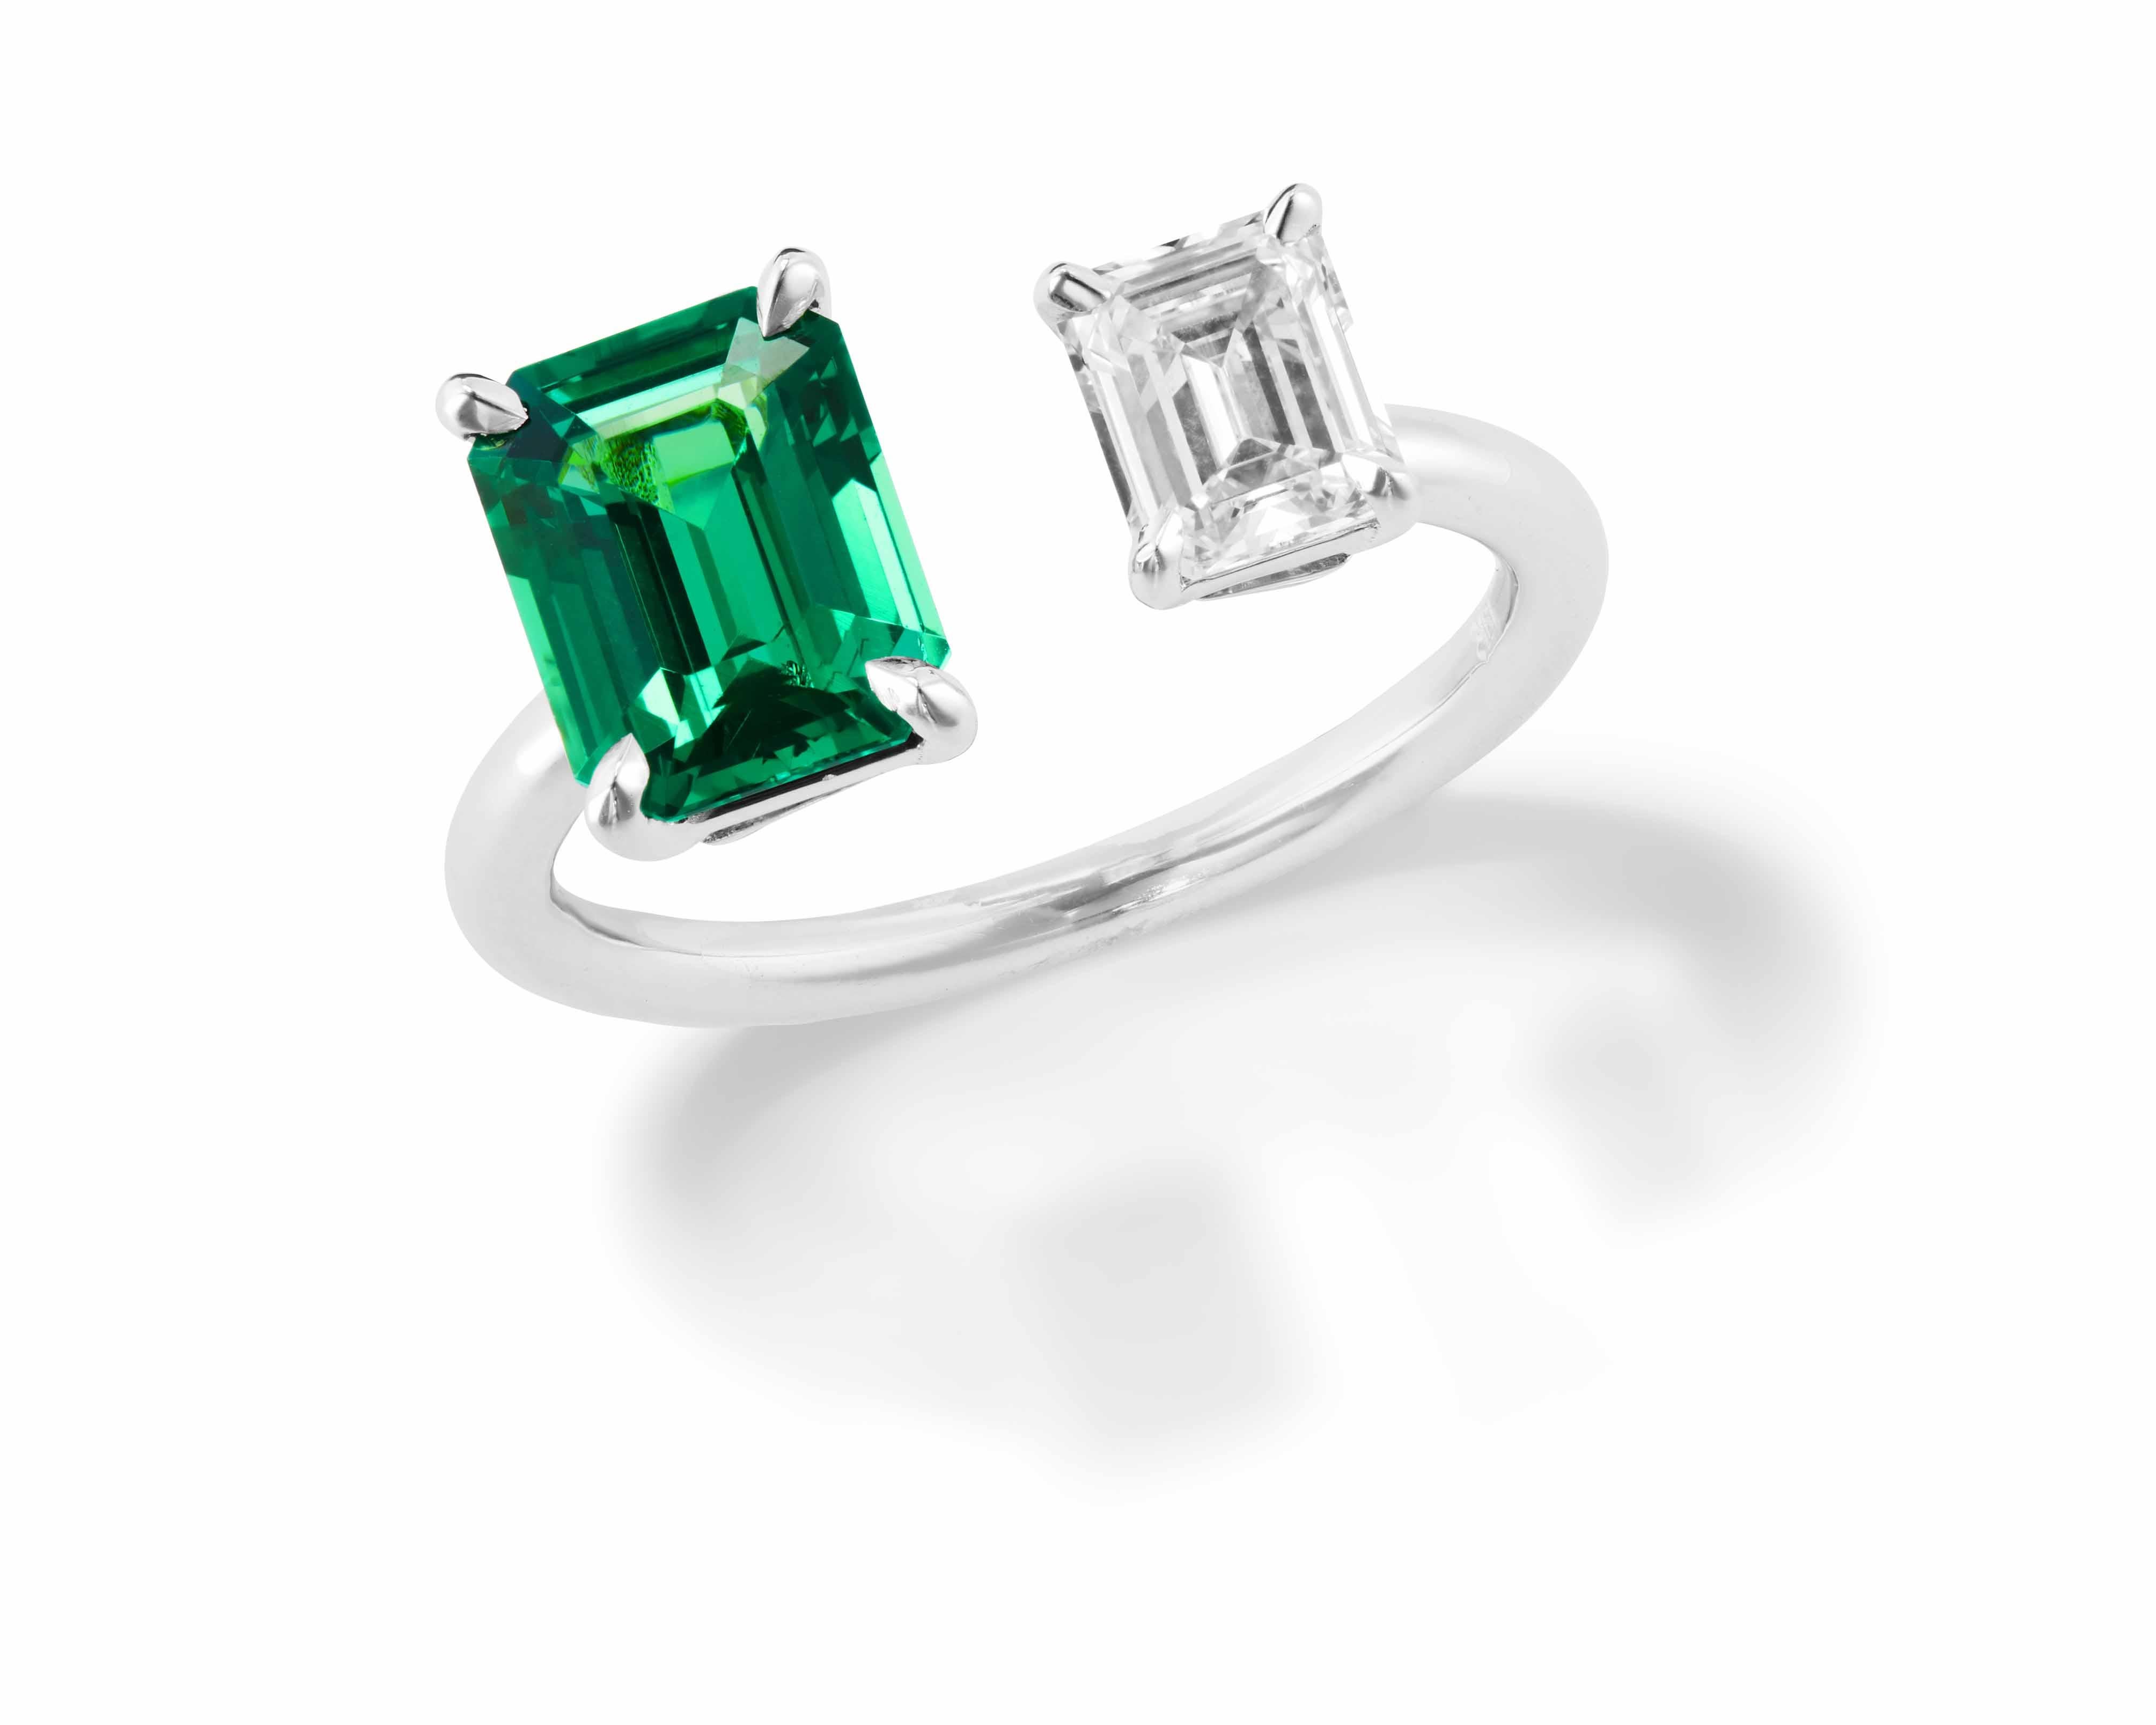 Elevate your look with a pop of color from Tsavorite and Diamond Open ring. 

2.05 ct emerald-cut Tsavorite* and 0.69 ct emerald-cut J VS1 diamond. Handcrafted in 18k white gold, the ring is designed to be worn alone or layered and mixed for a chic